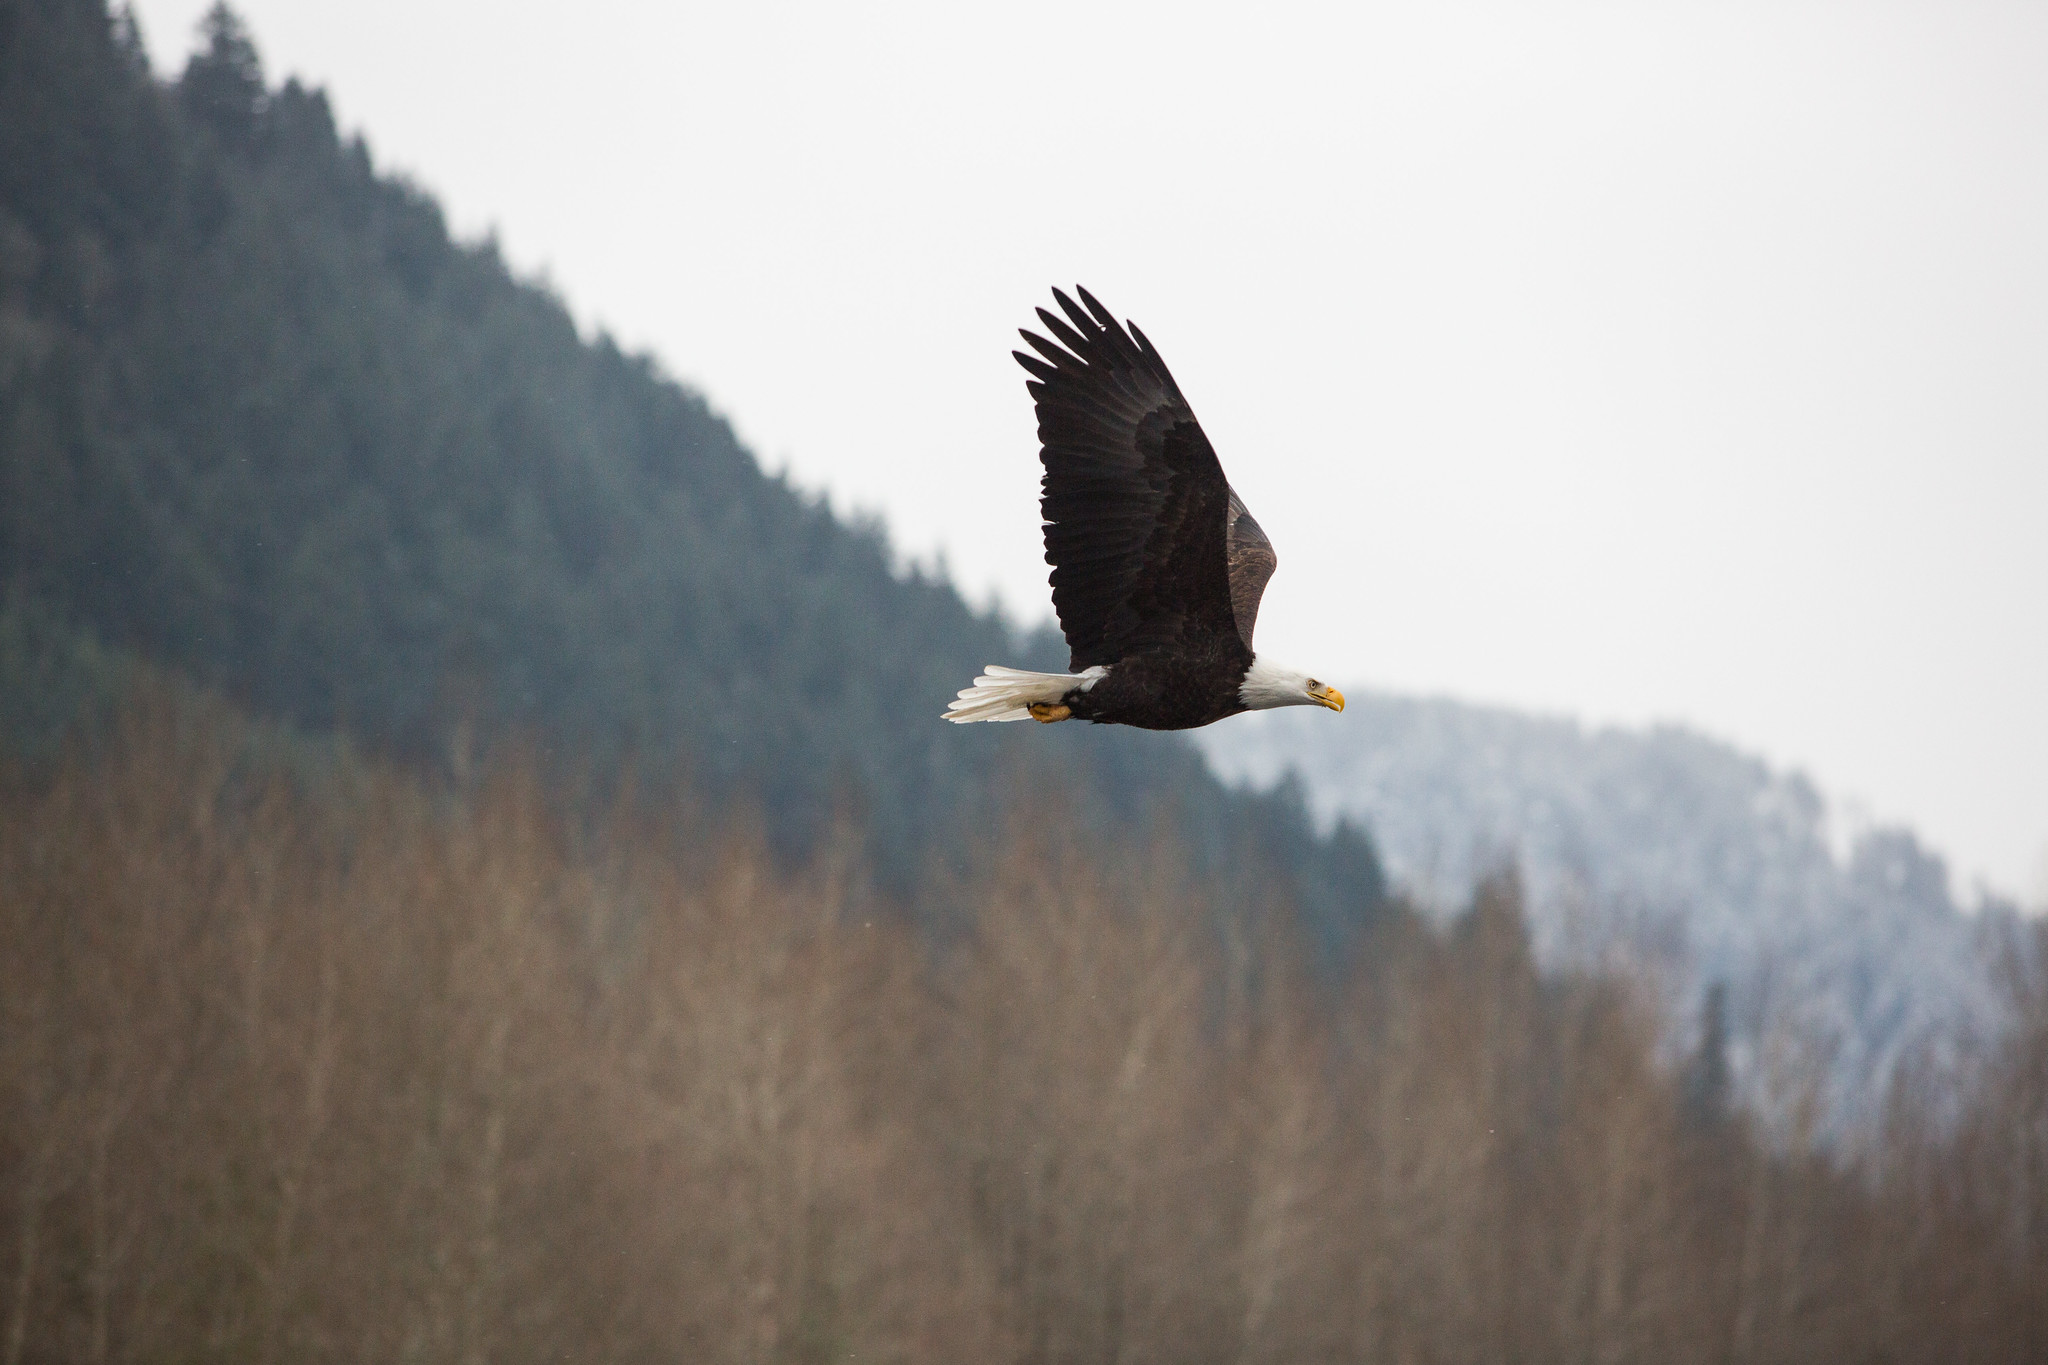 A bald eagle is flying on a cloudy day